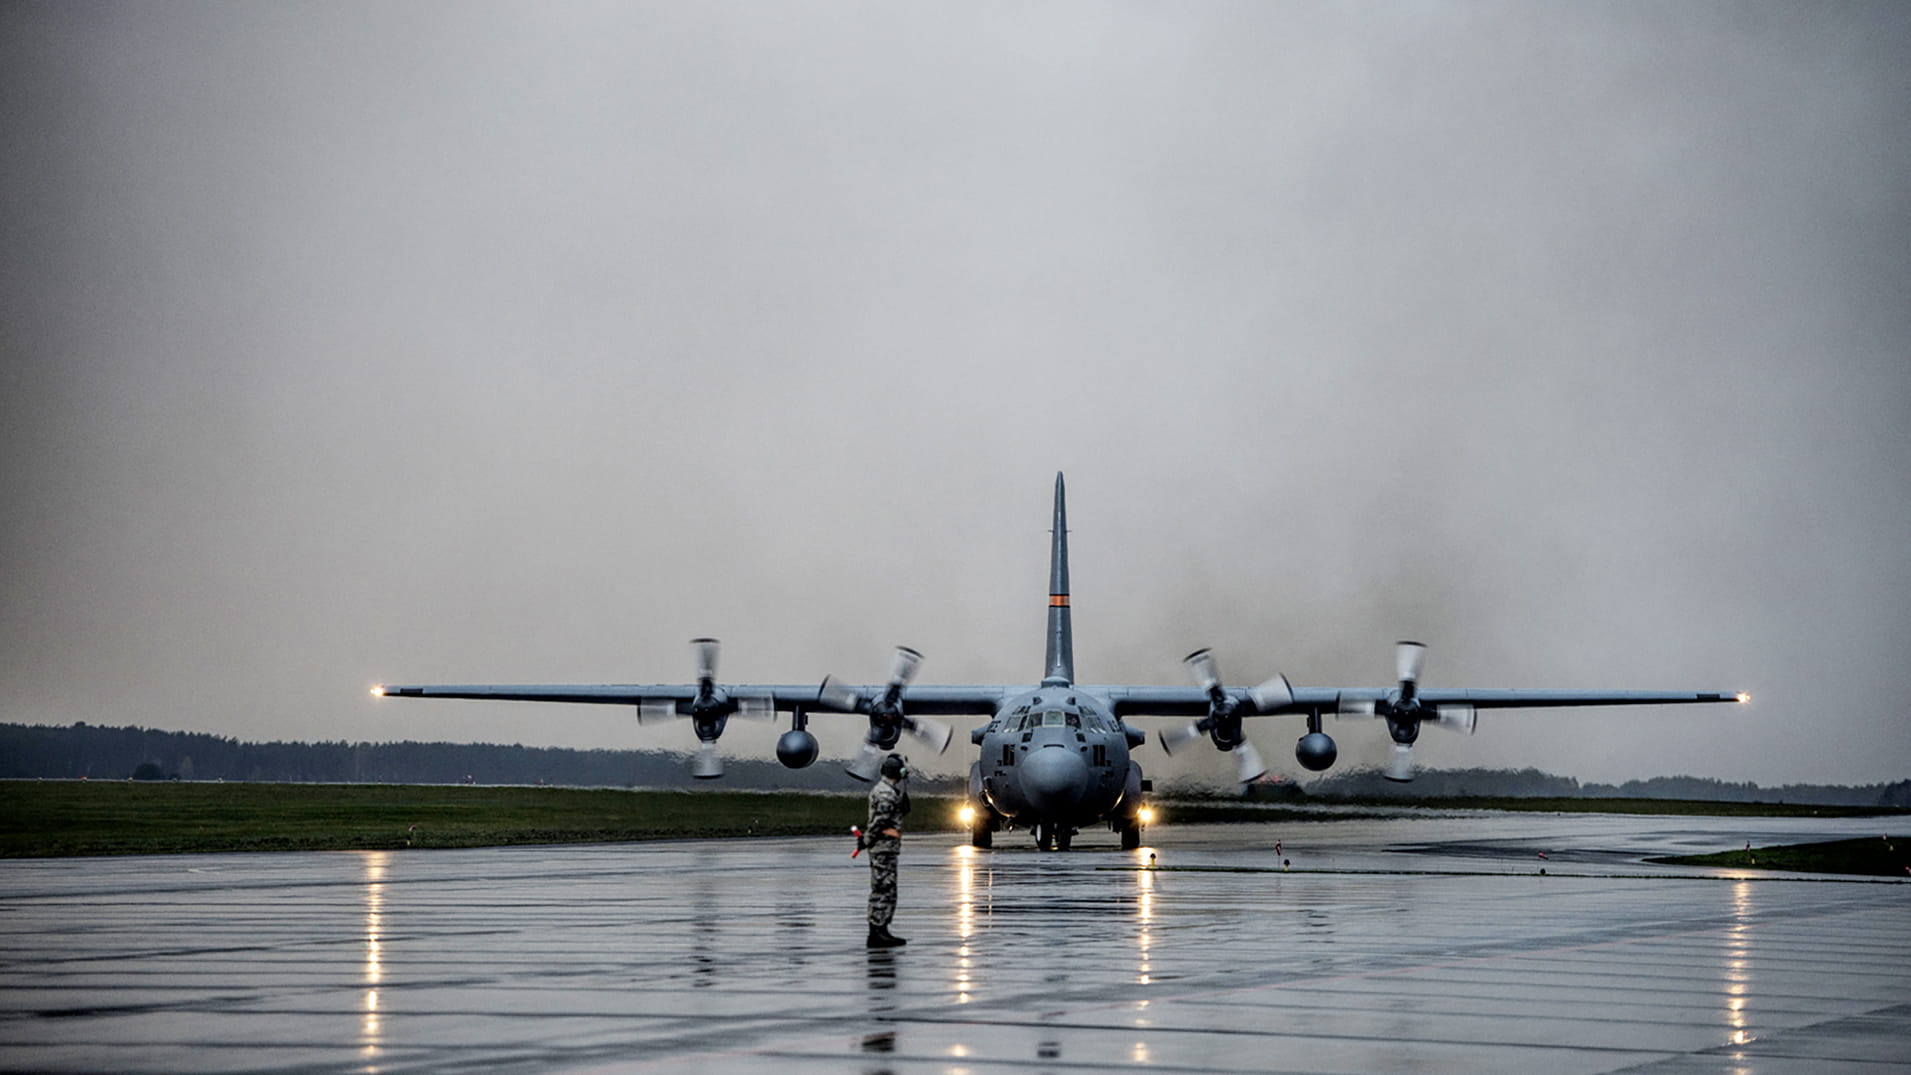 Military C-130 taking off